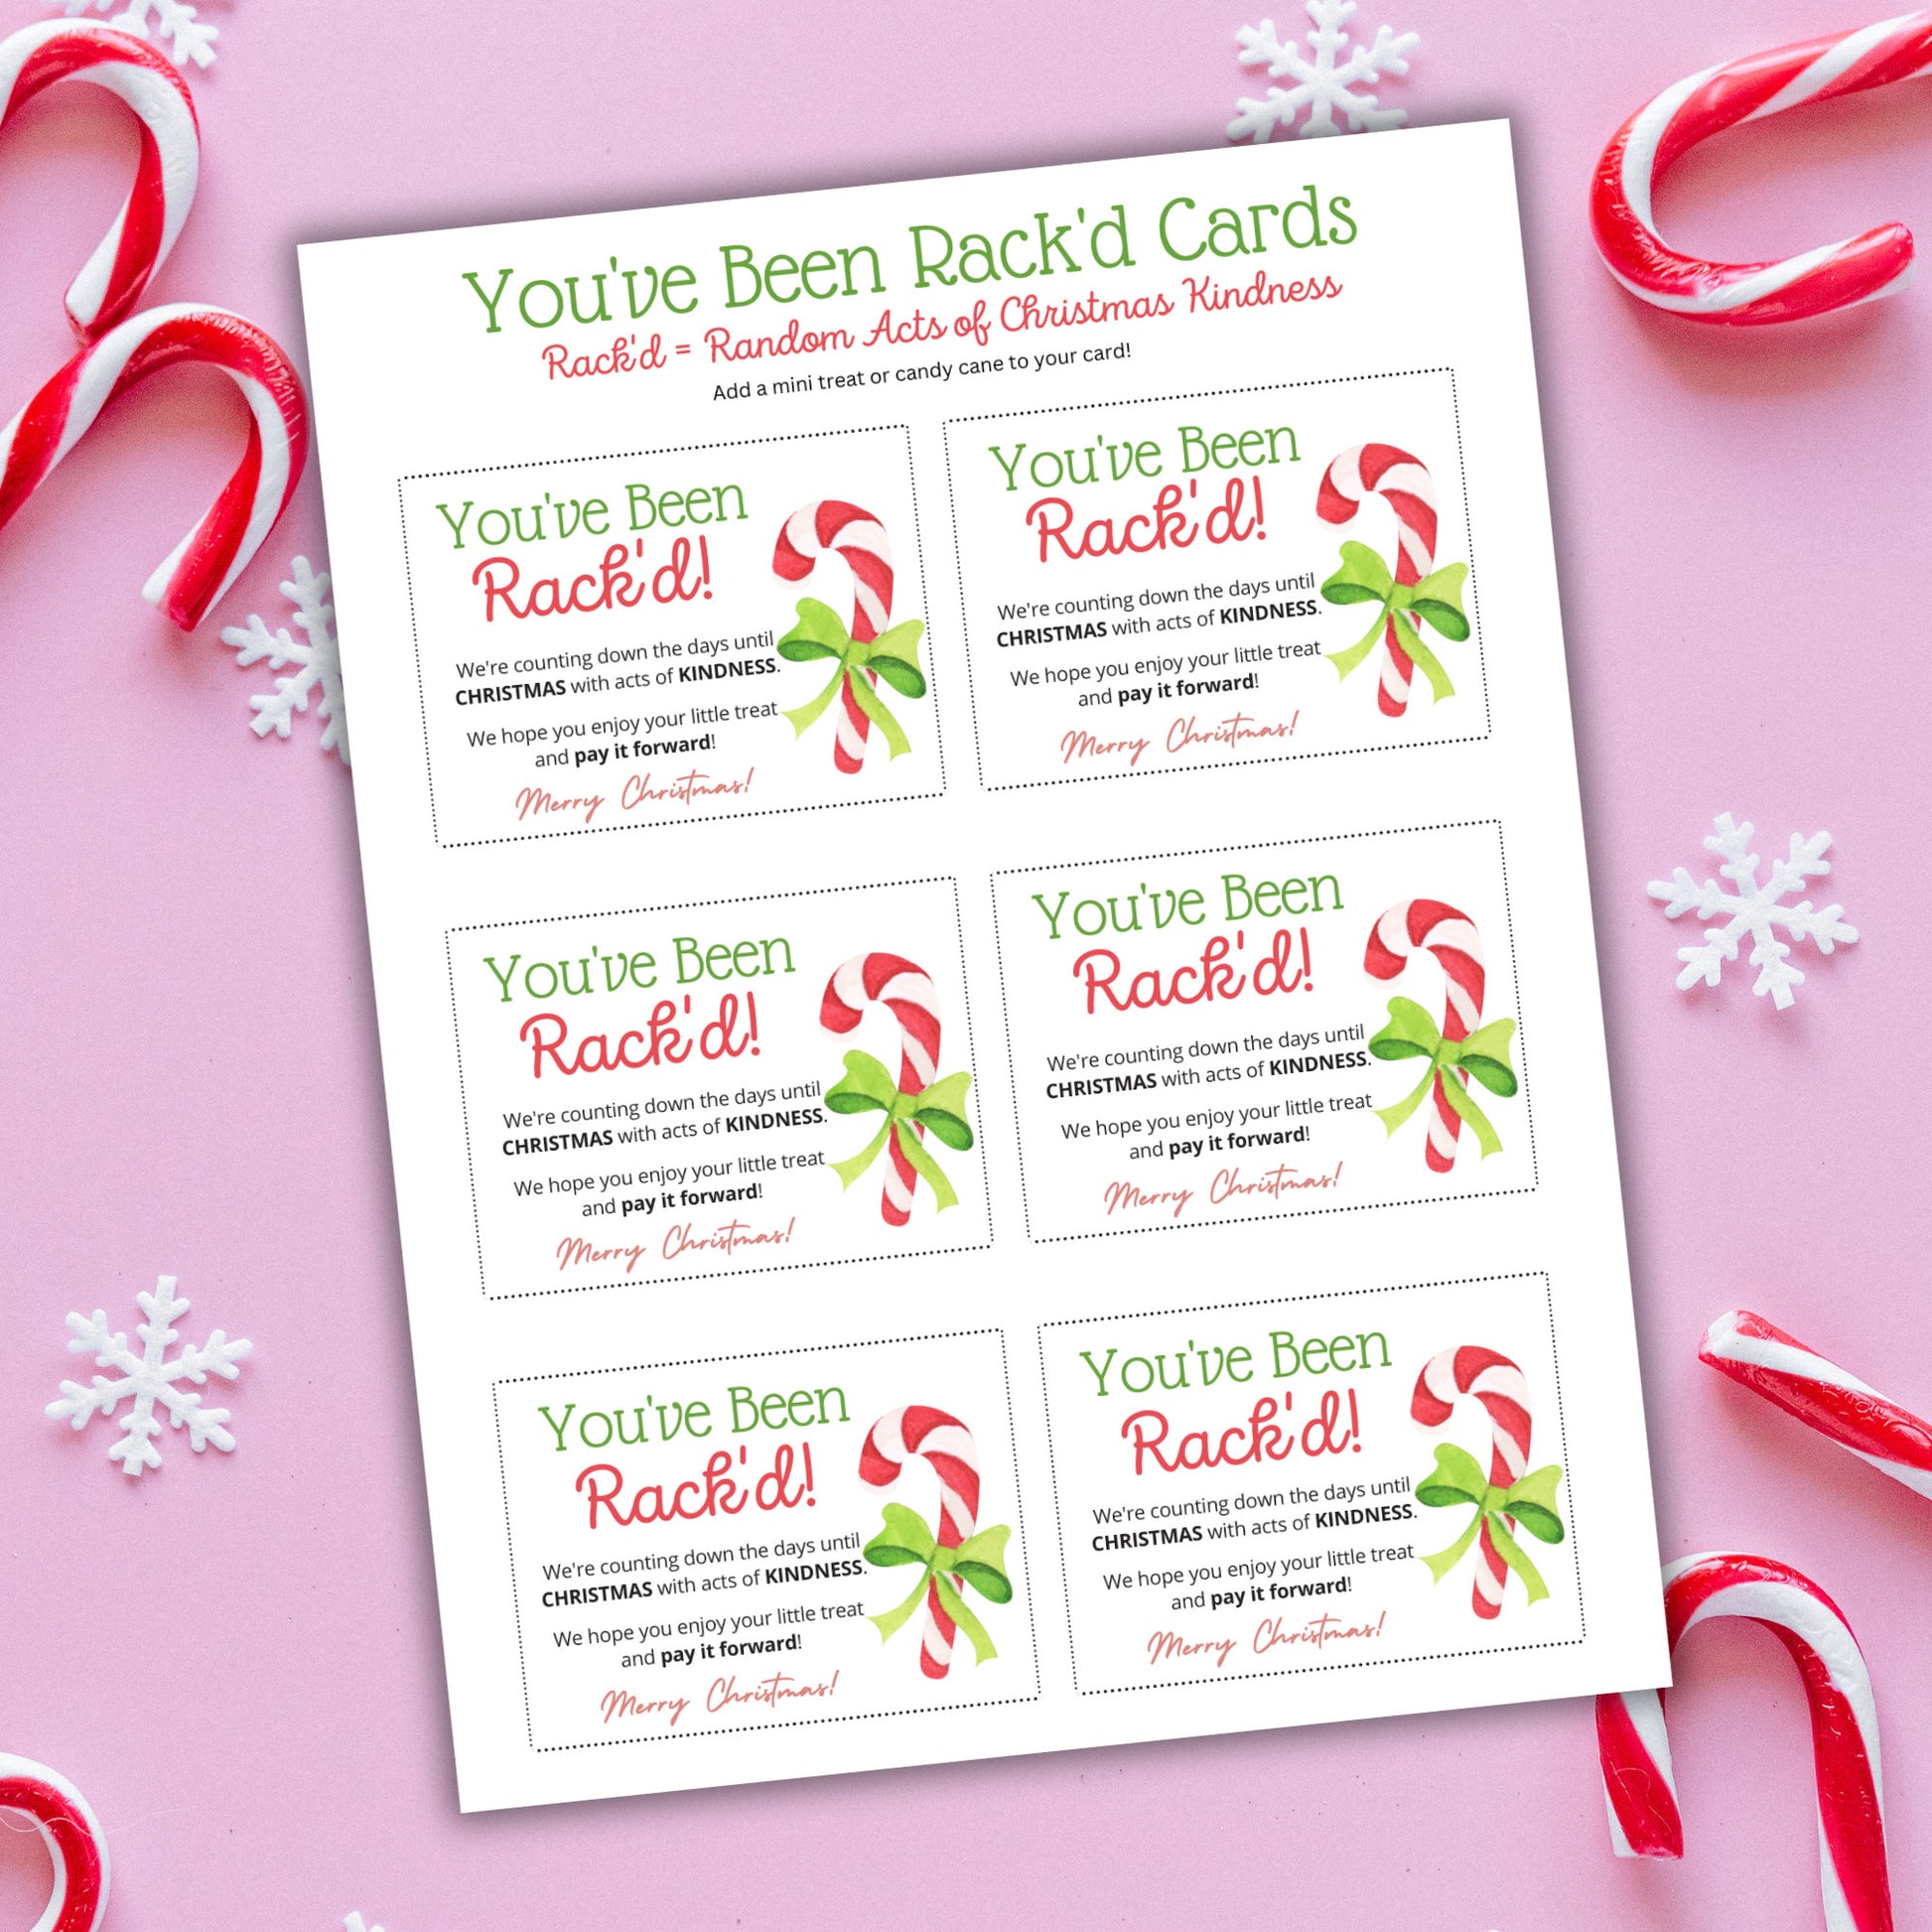 You've Been Rack'd Printable Cards, Random Acts of Christmas Kindness Printable, Christmas Treat Tags, Acts of Kindness, Digital Download